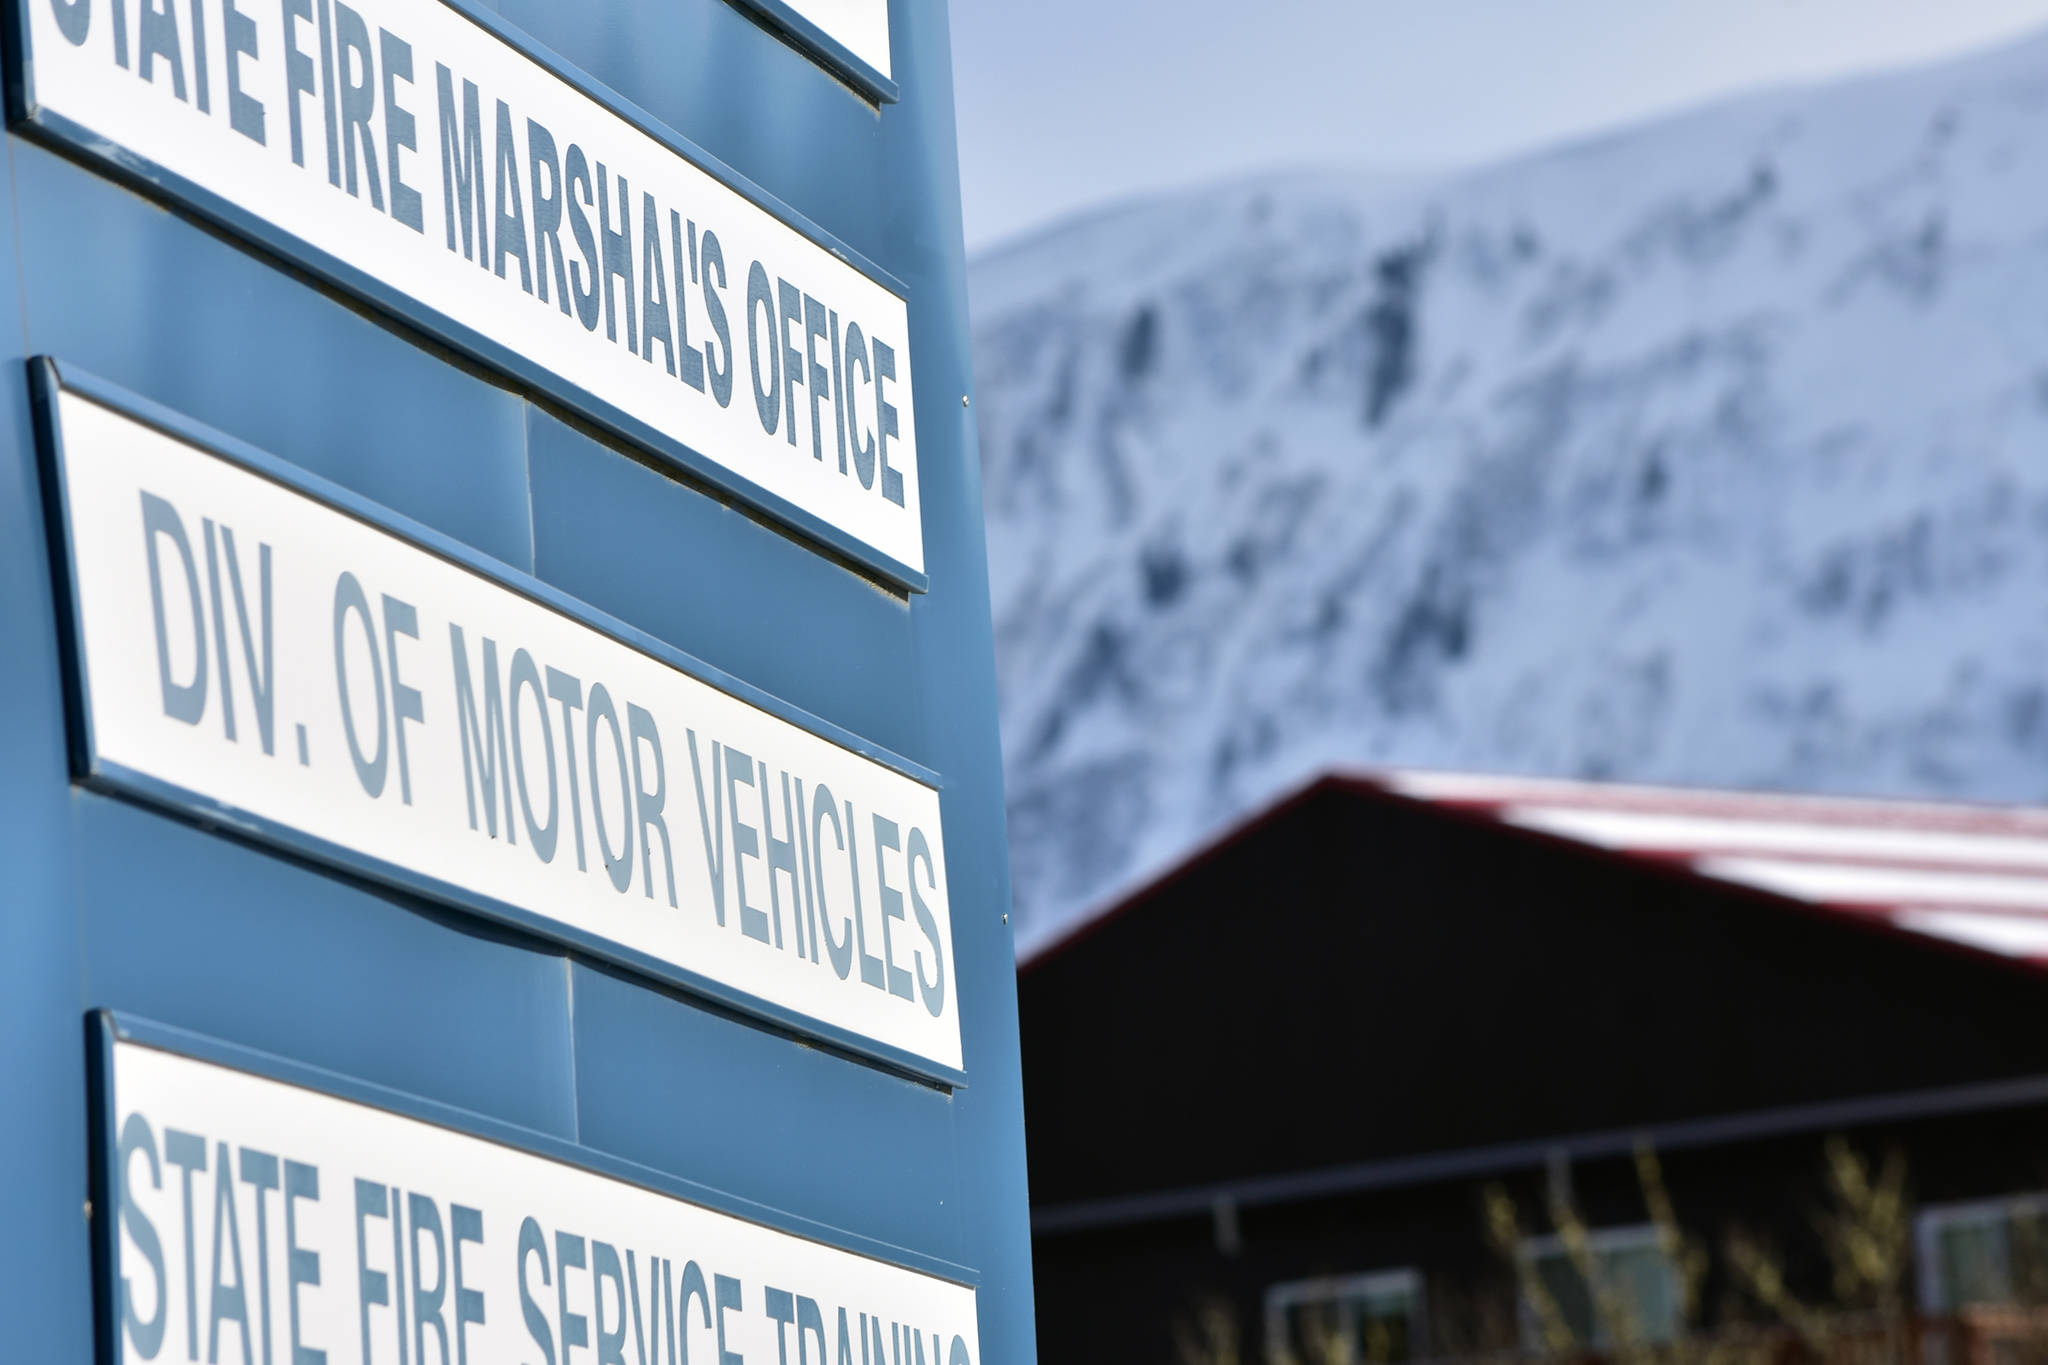 This photo shows the sign for the Department of Motor Vehicles in Juneau on March 18, 2021. Had a proposal to close six rural DMVs gone through, Juneau woud be the closest DMV for residents in Haines, who aren’t able to drive there. (Peter Segall / Juneau Empire)